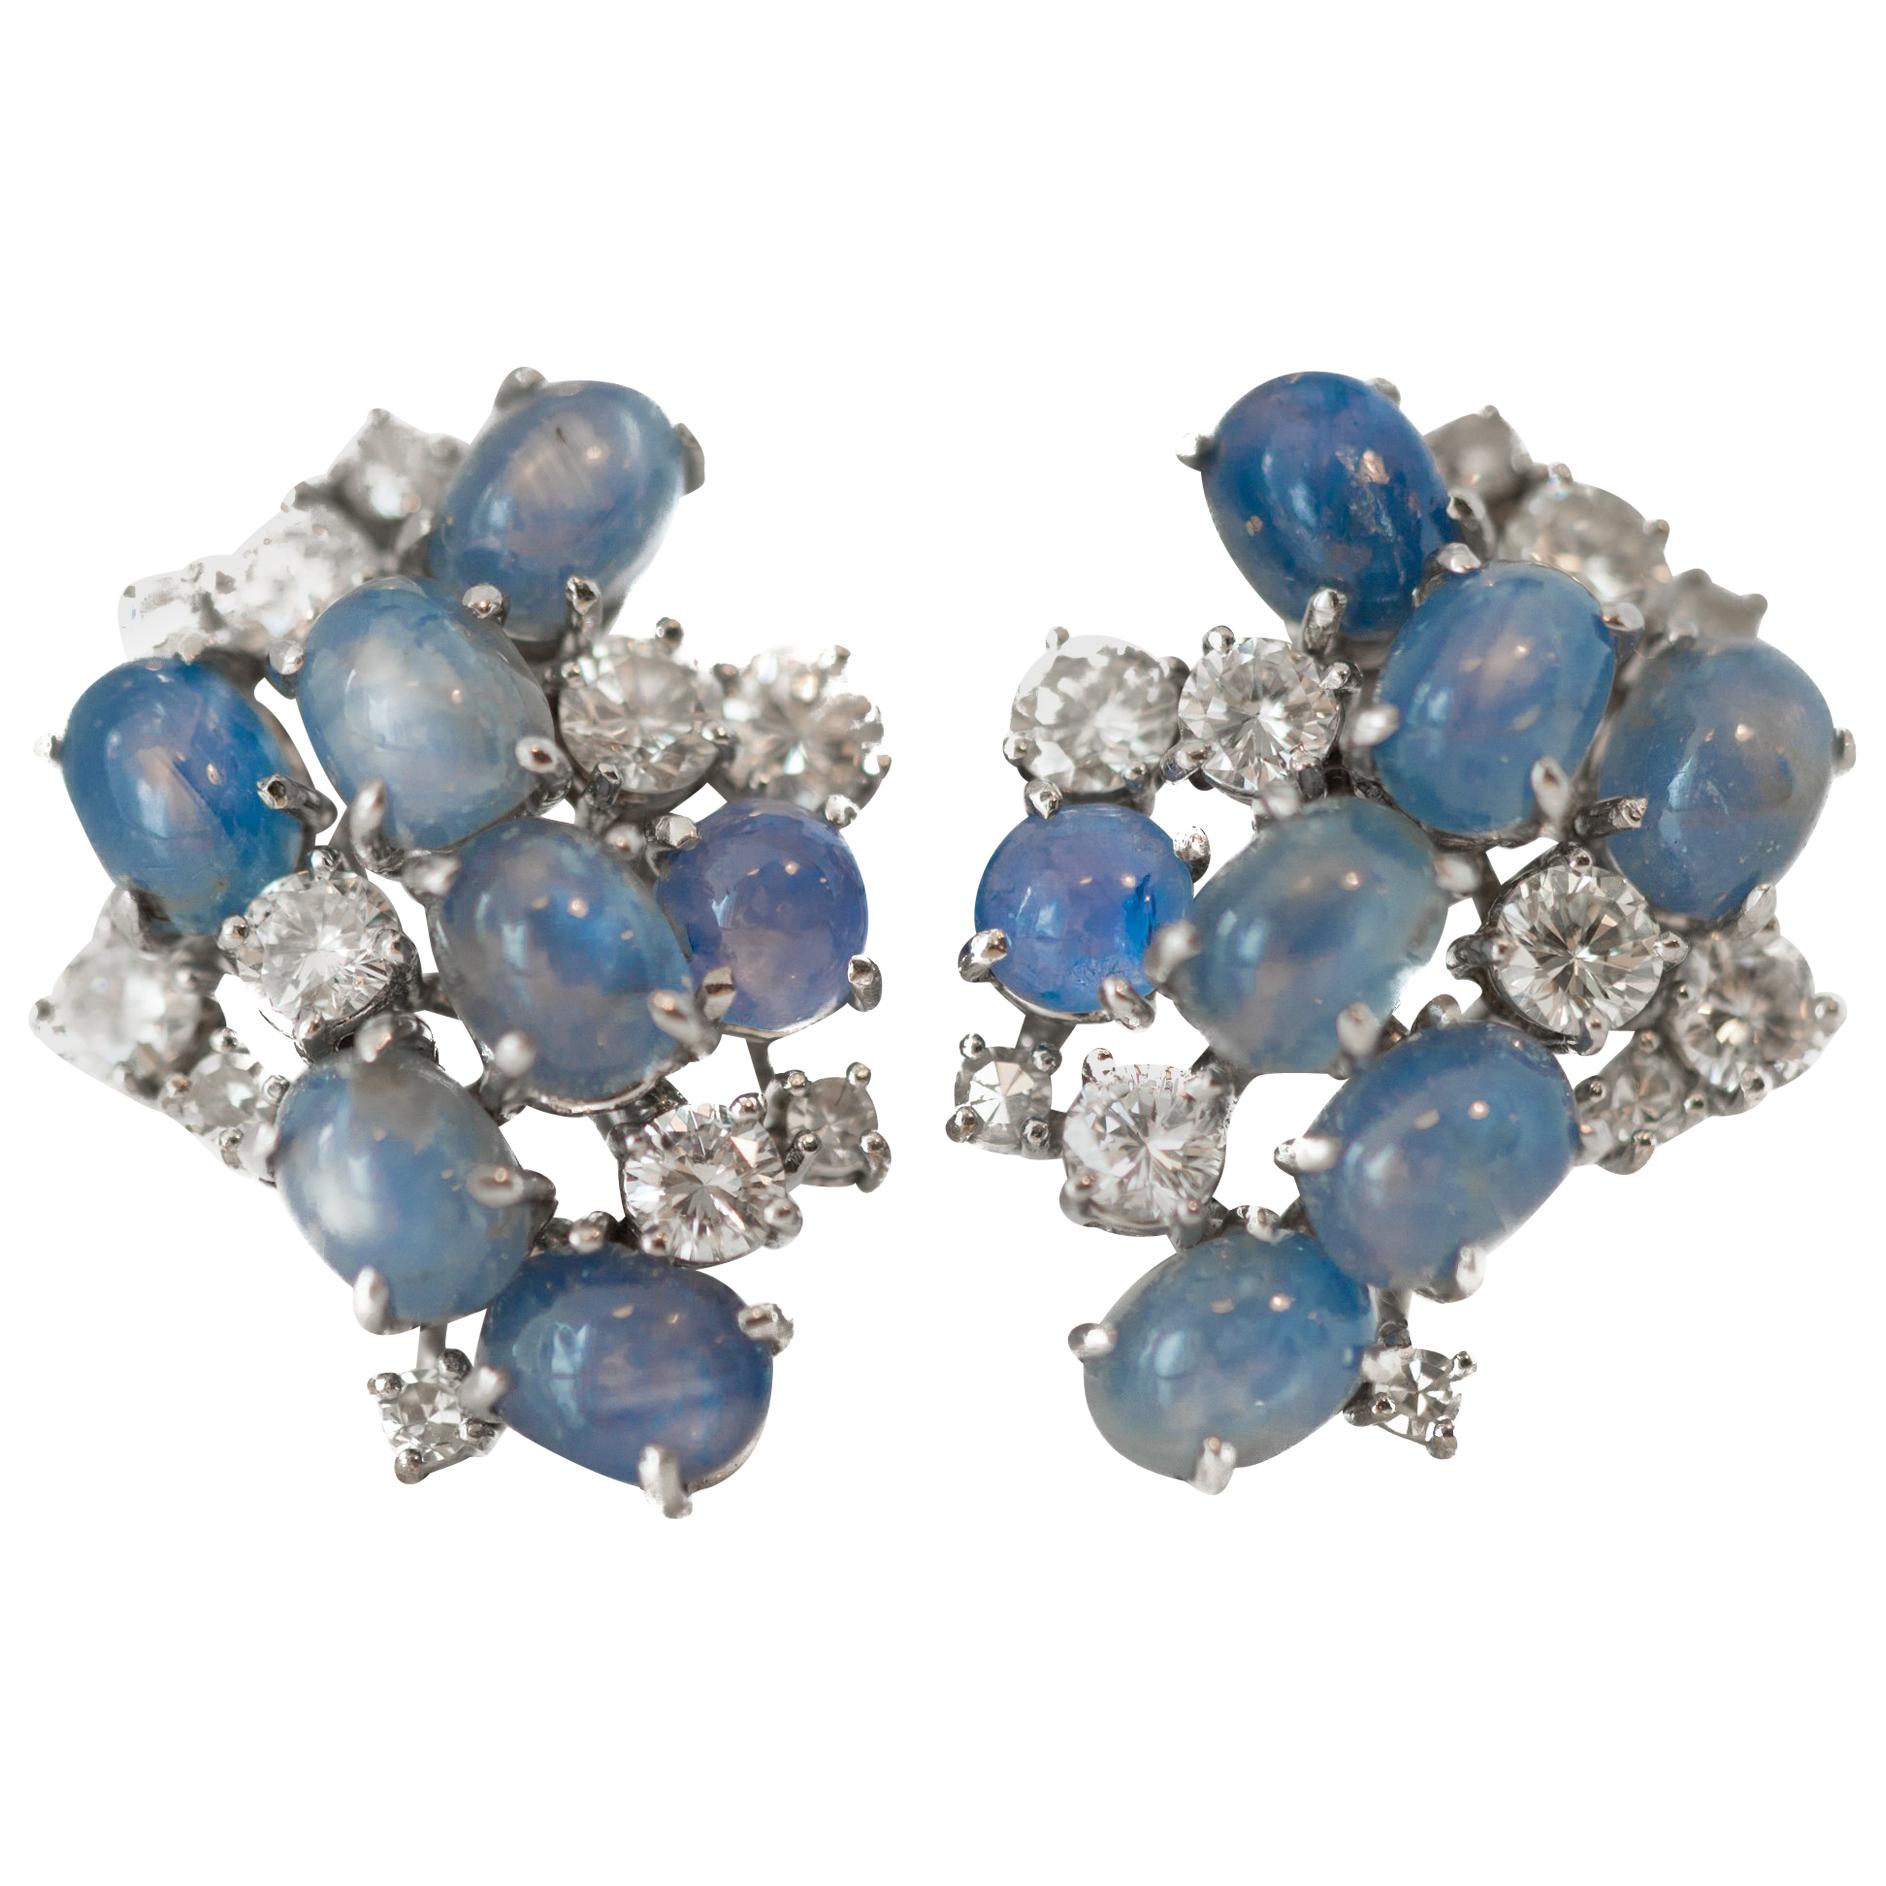 1950s 3.5 Carat Total Diamond and Sapphire Clip-On Earrings for Non Pierced Ears